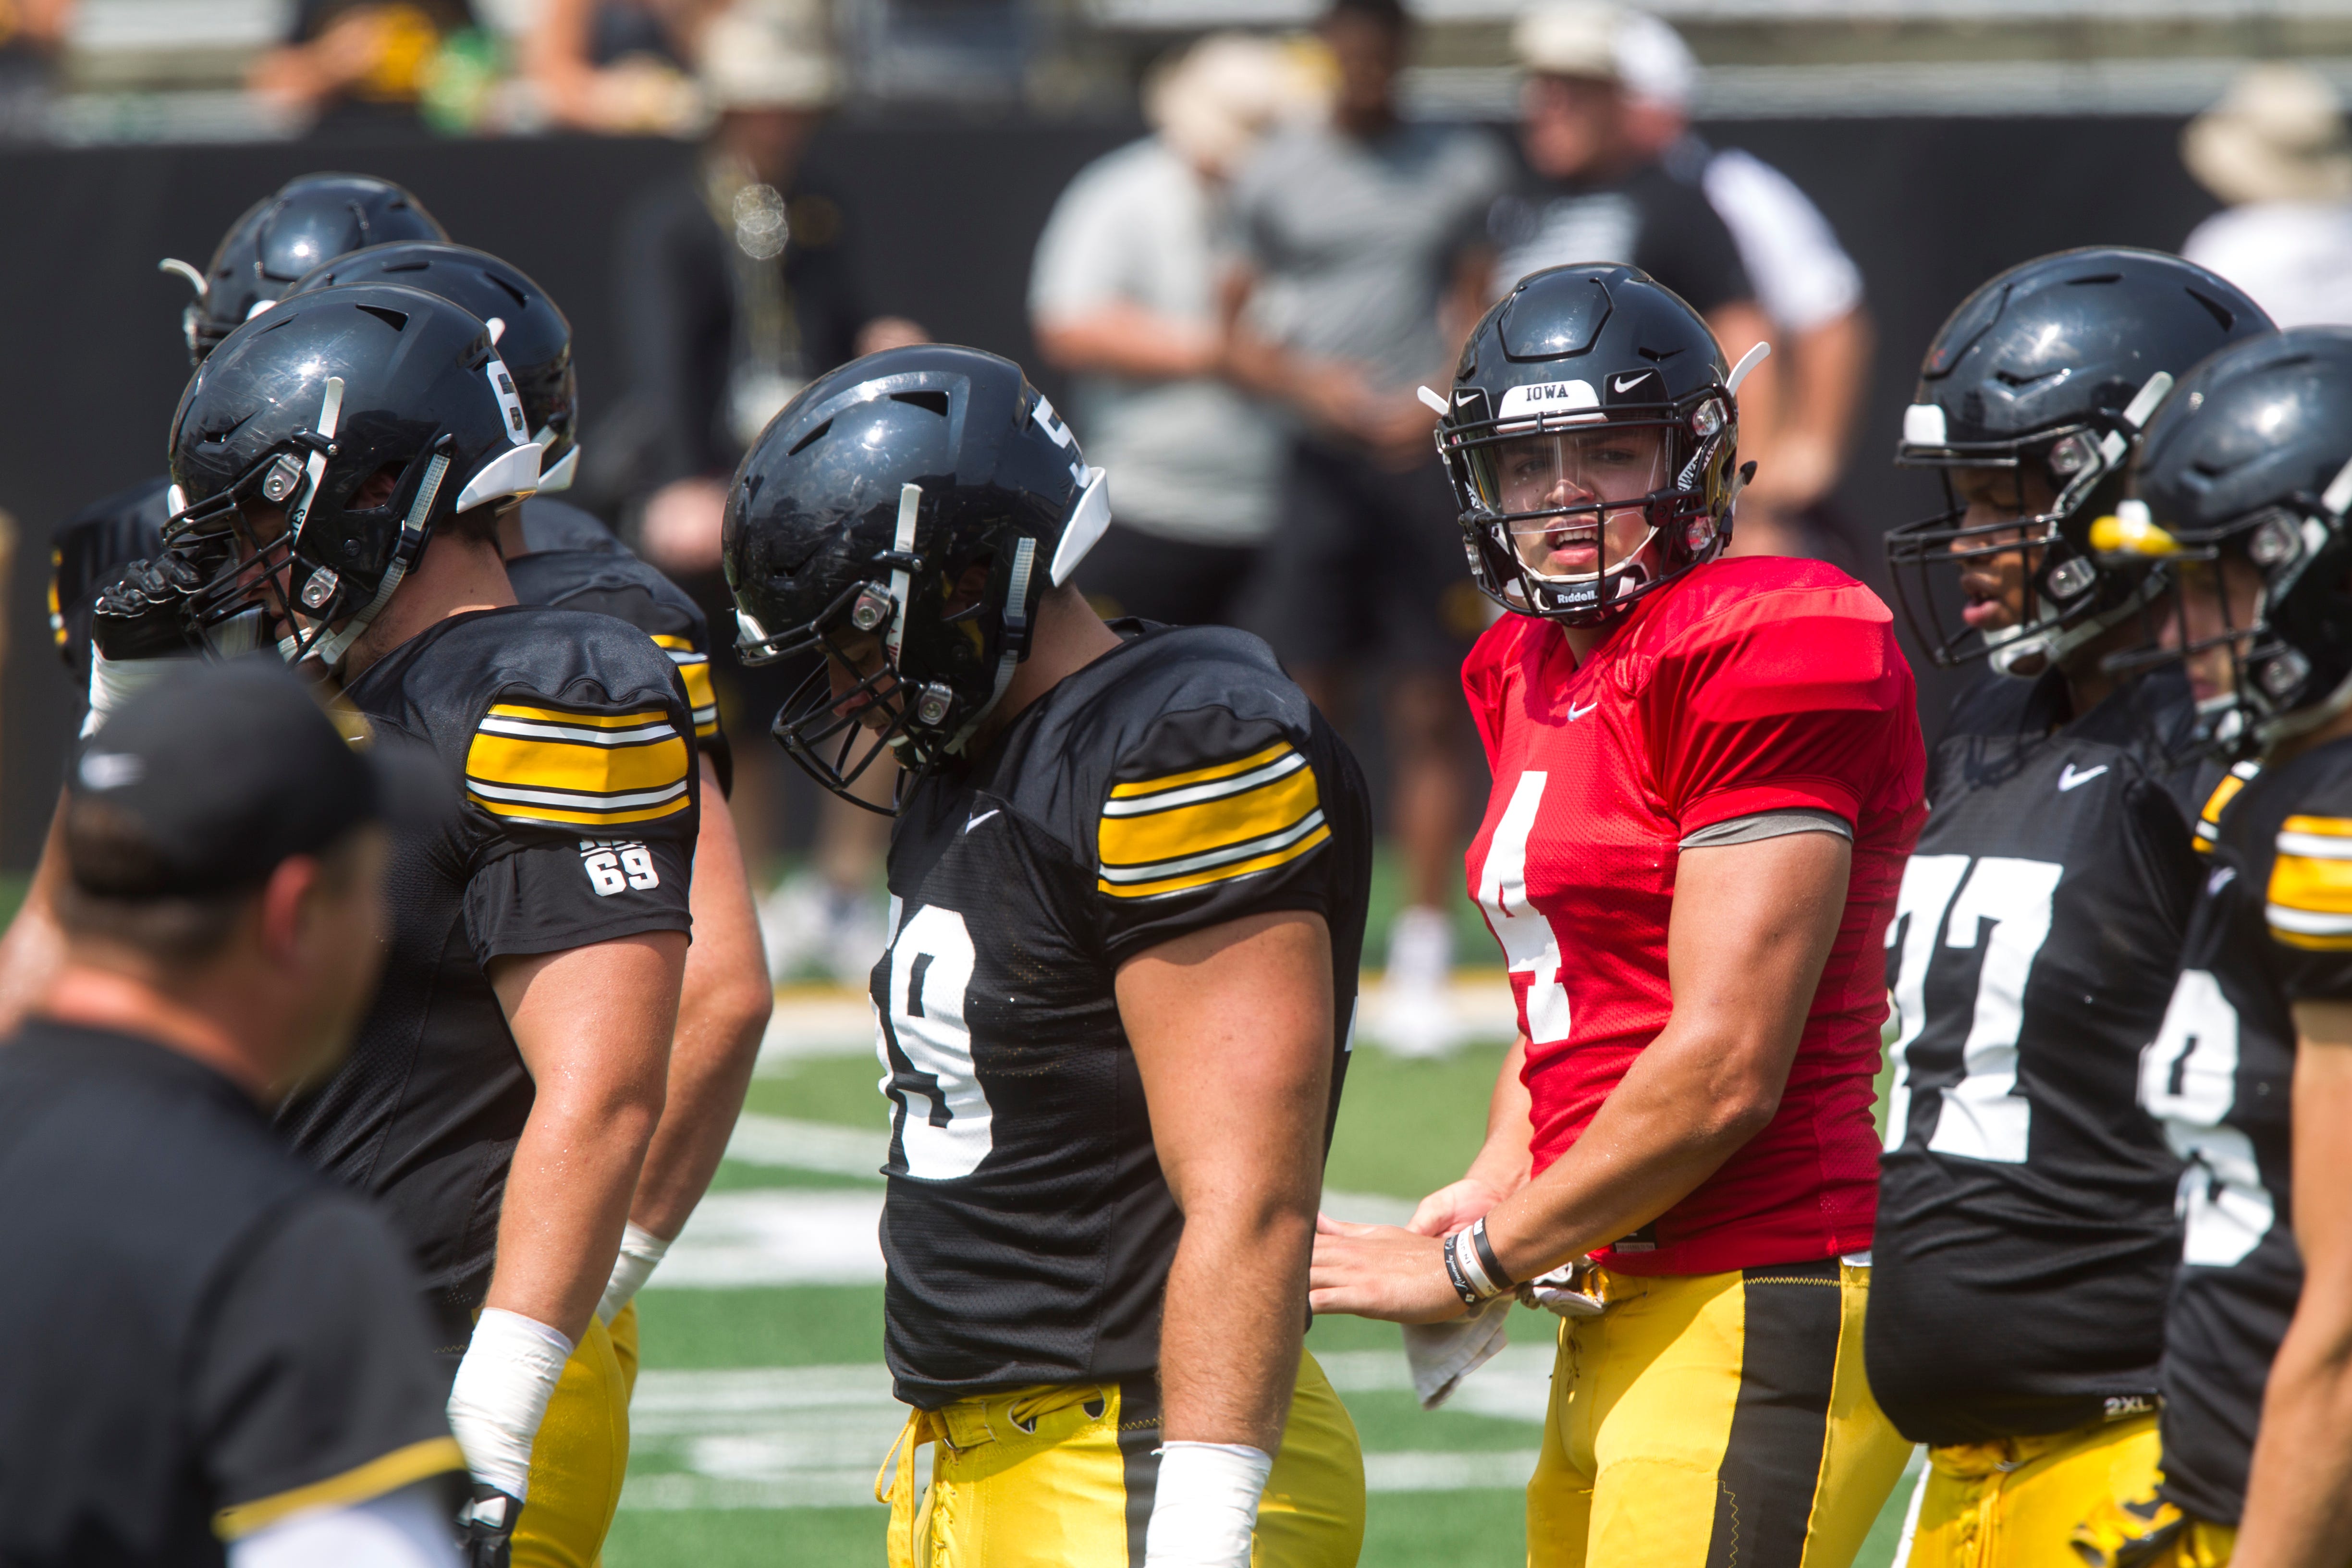 Iowa quarterback Nate Stanley looks to the sideline during a Kids Day practice on Saturday, Aug. 11, 2018, at Kinnick Stadium in Iowa City.